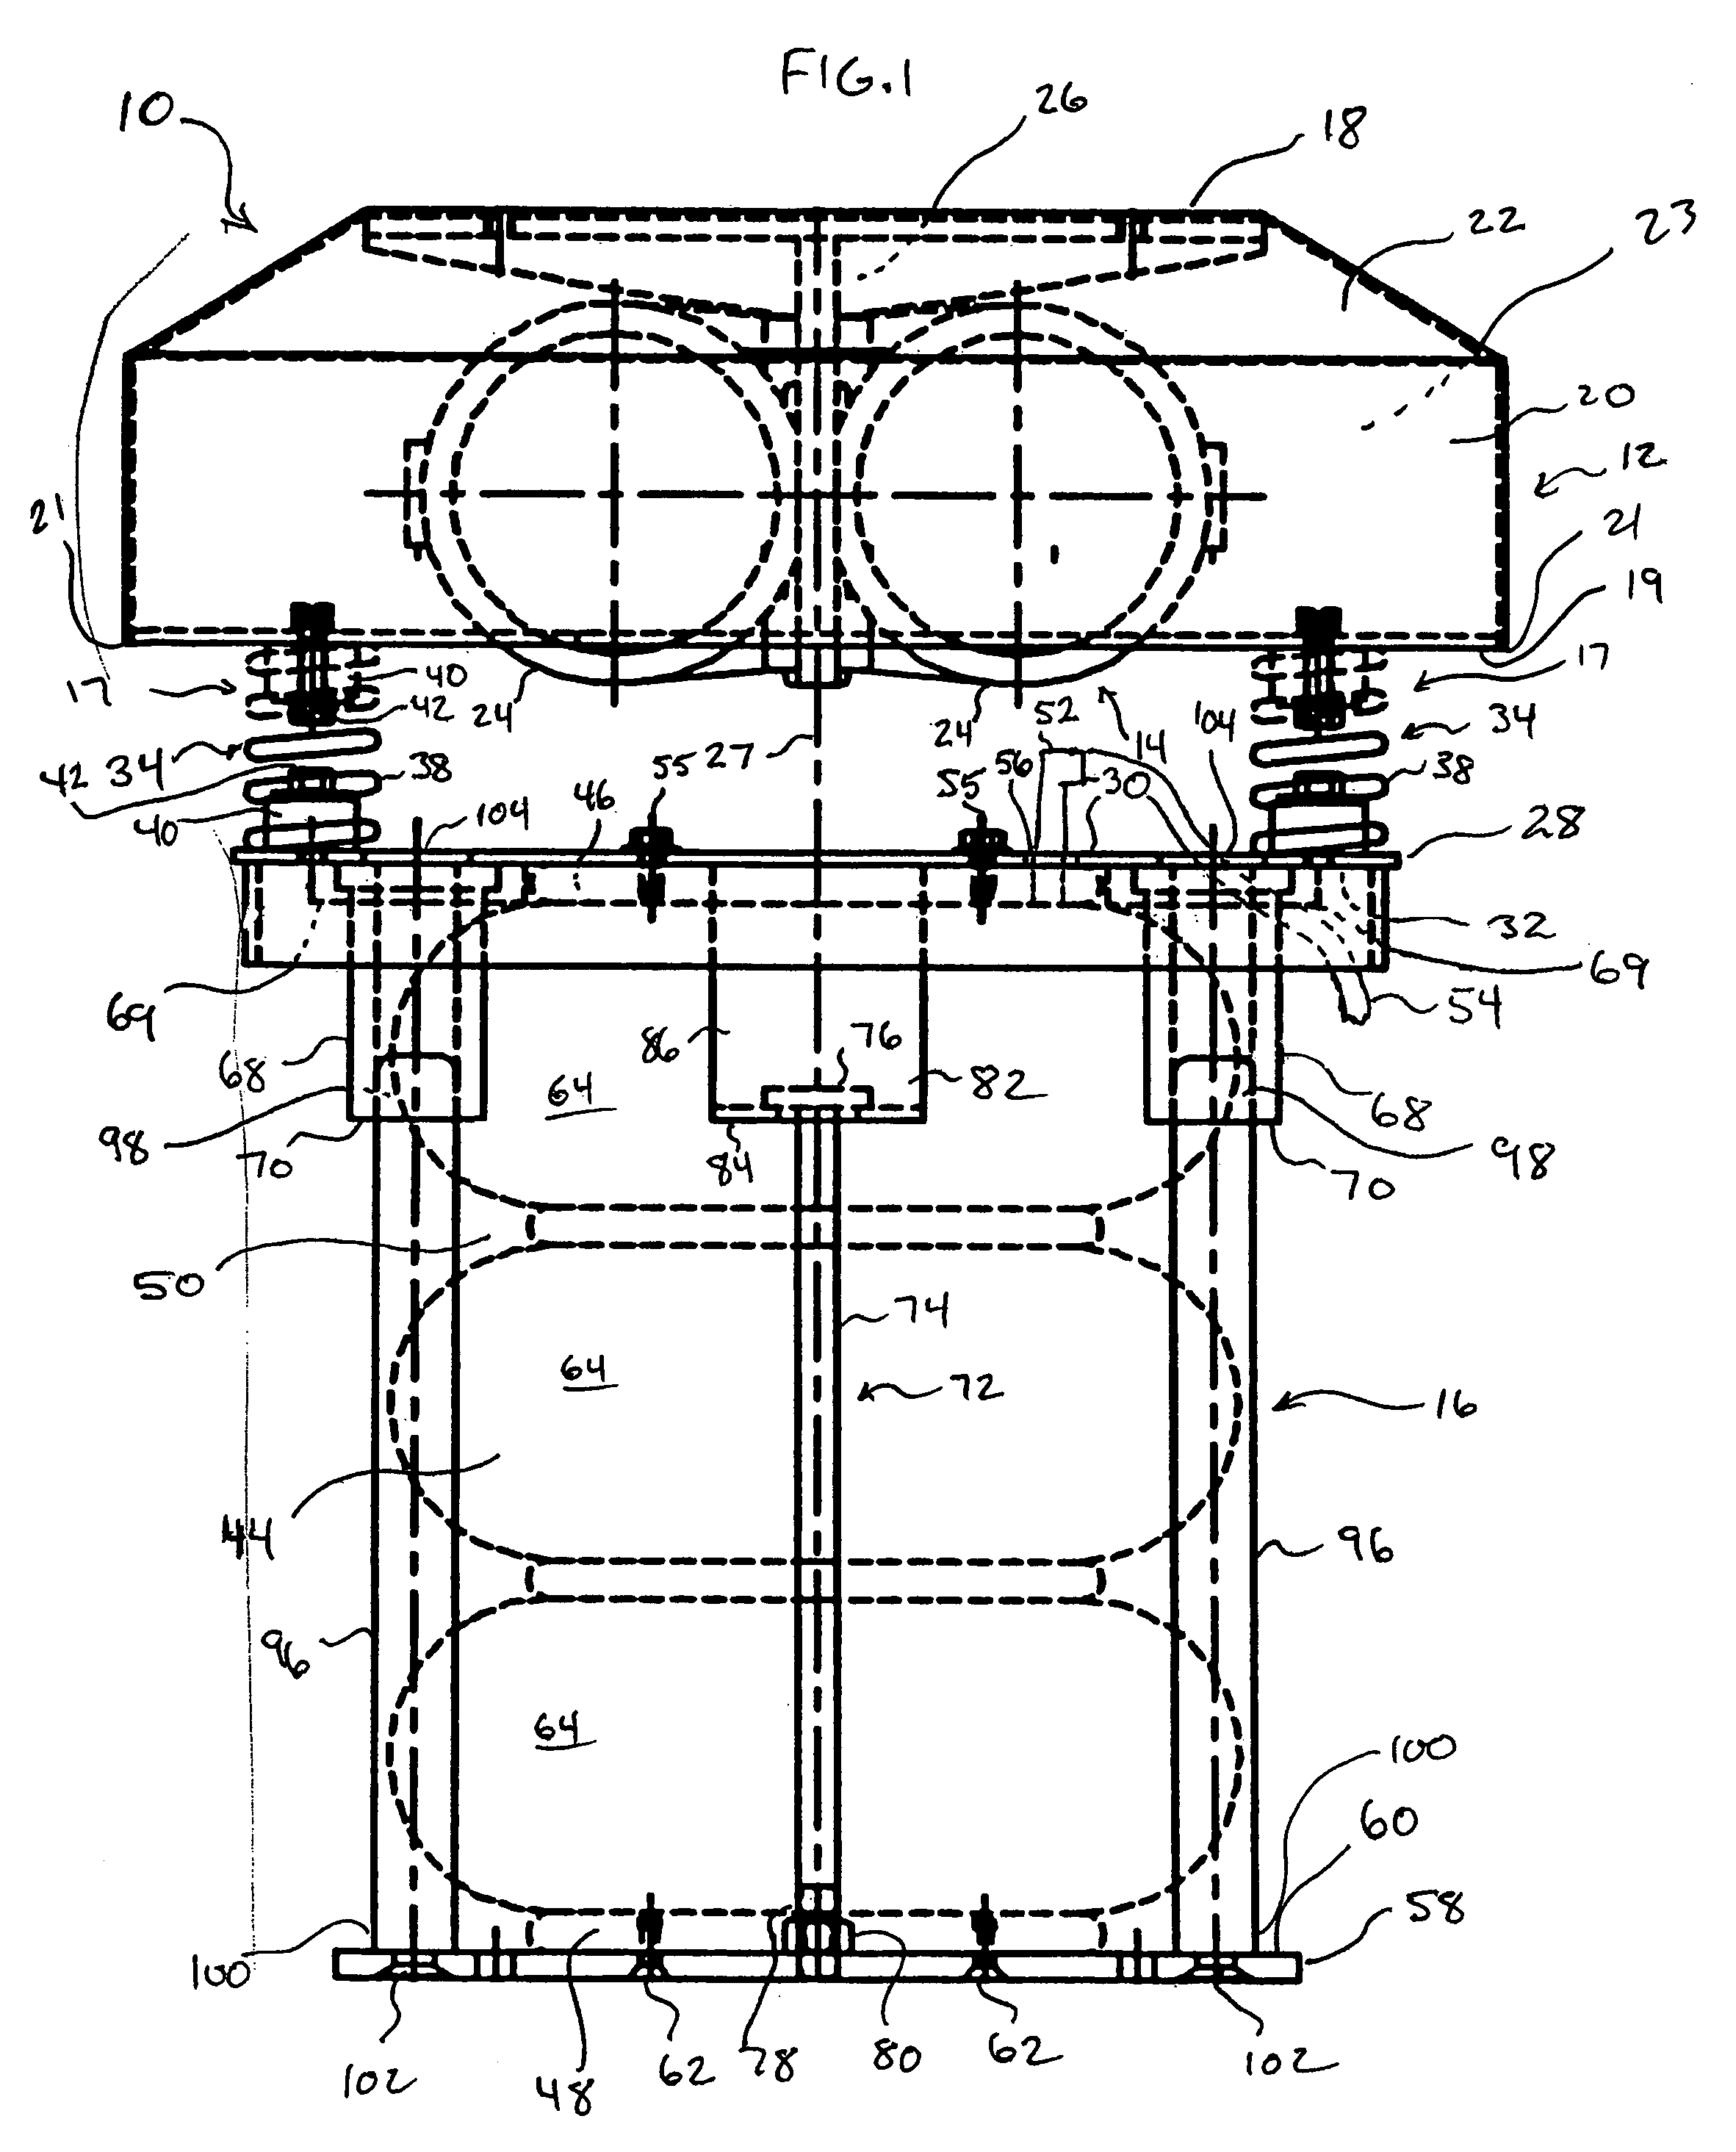 Vibrating table assembly for bag filling apparatus